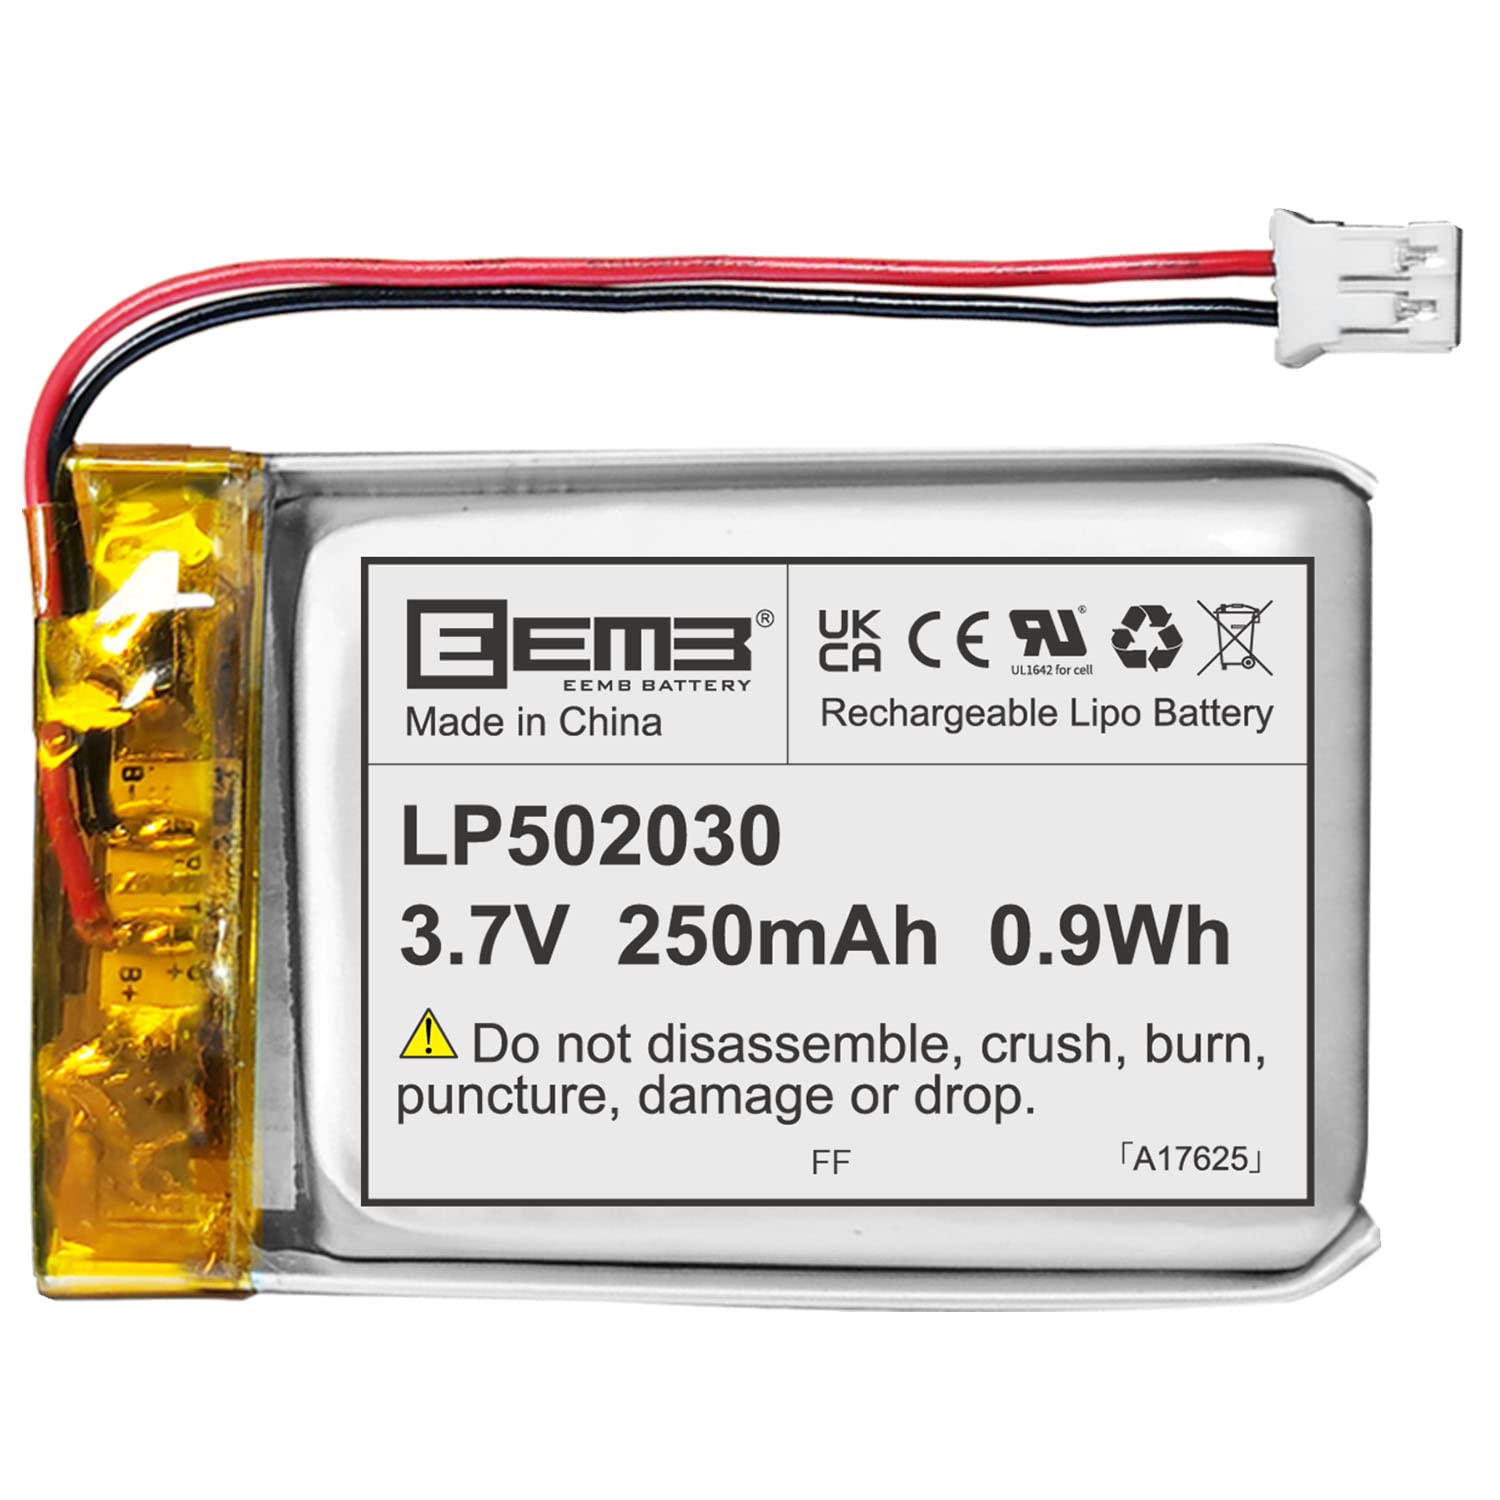 LiPO Battery in Body Fat Monitor - Lithium ion Battery